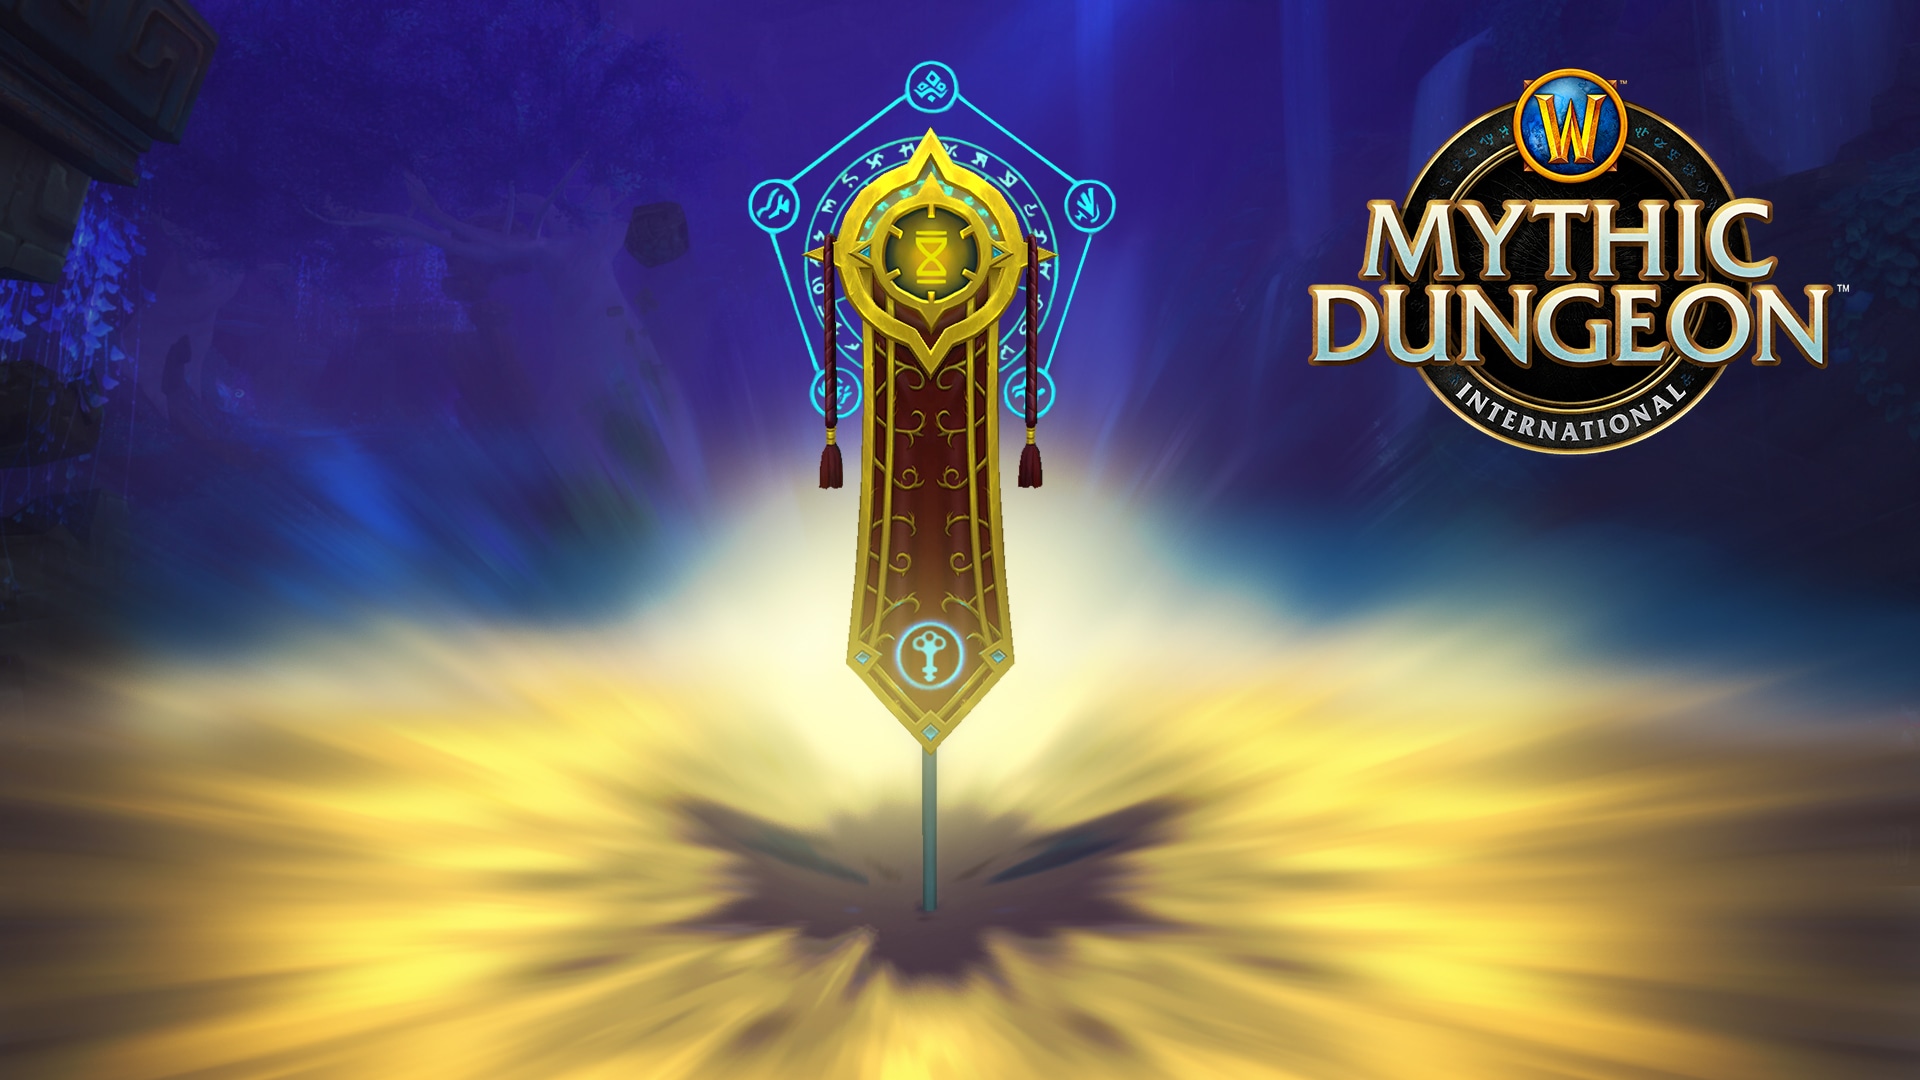 Mythic Dungeon International Logo and Encrypted Banner of the Opportune